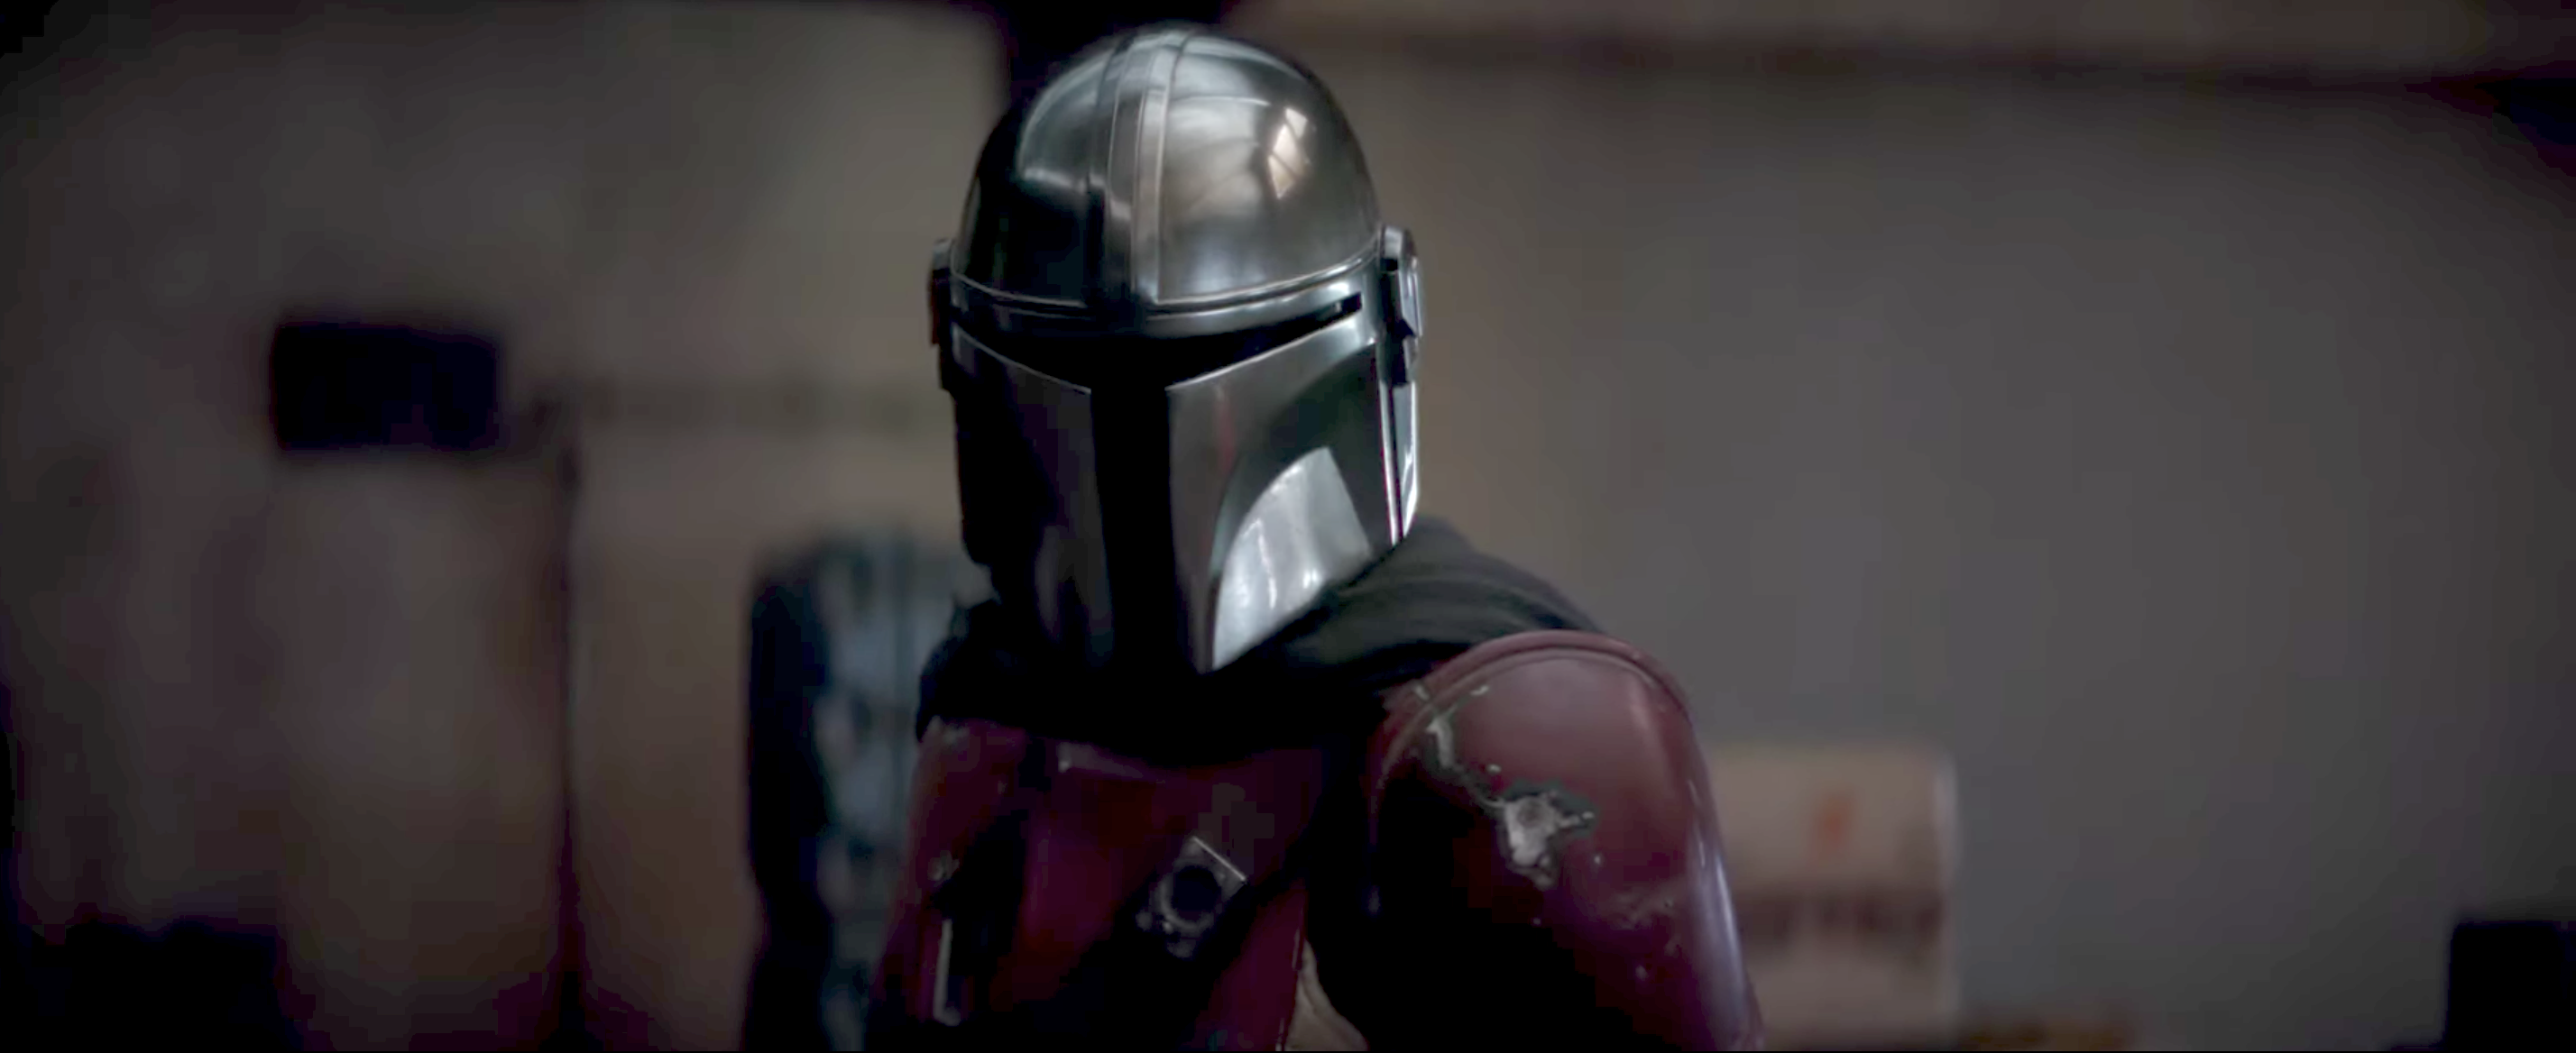 Boba Fett Just Made Another Appearance On The Mandalorian